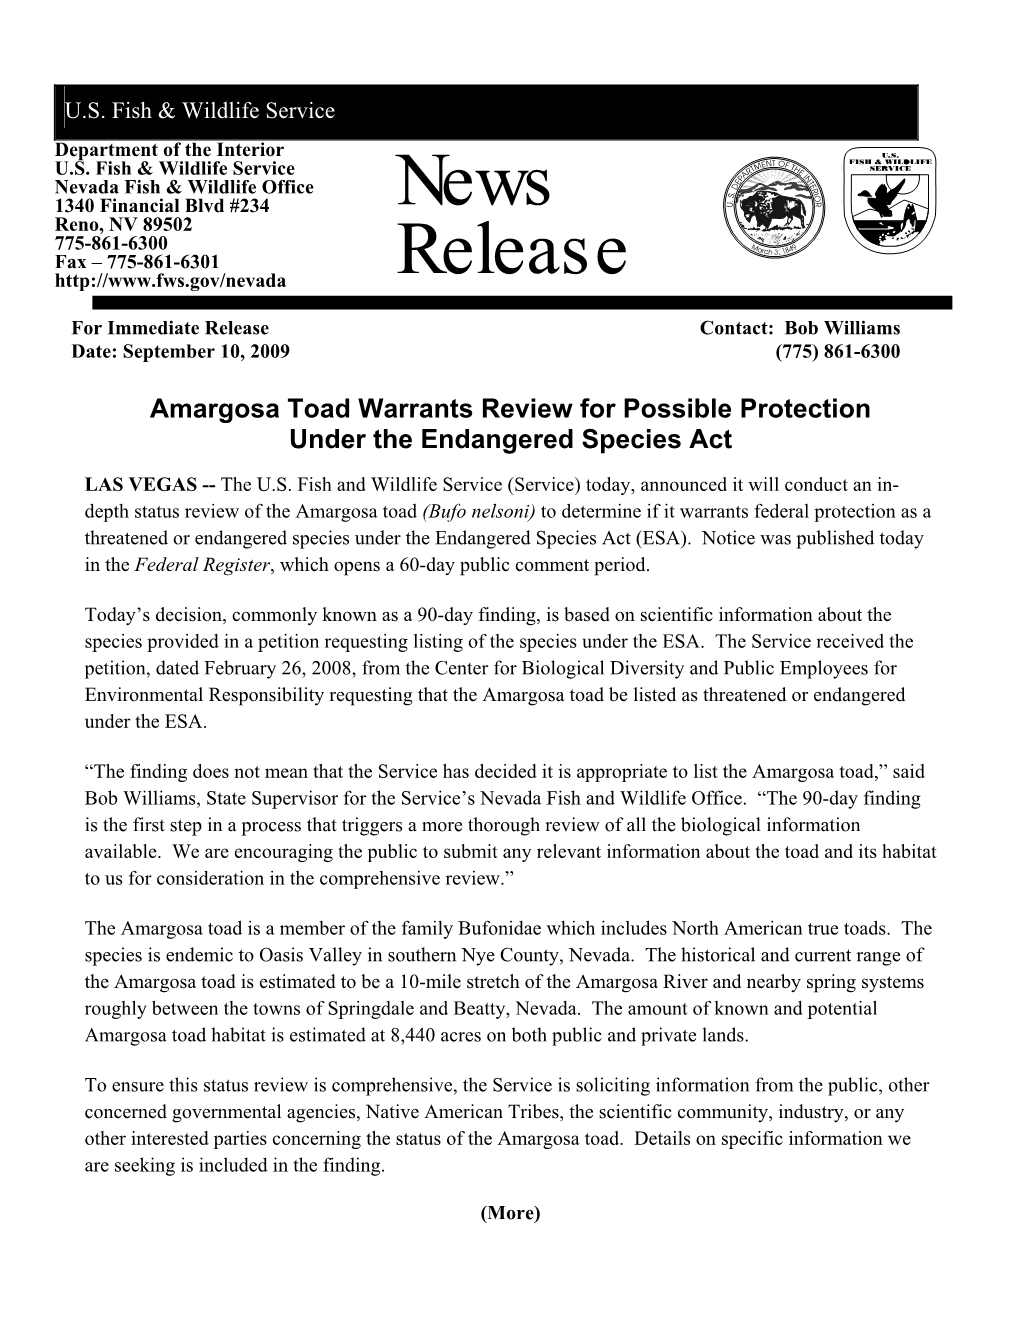 Amargosa Toad Warrants Review for Possible Protection Under the Endangered Species Act